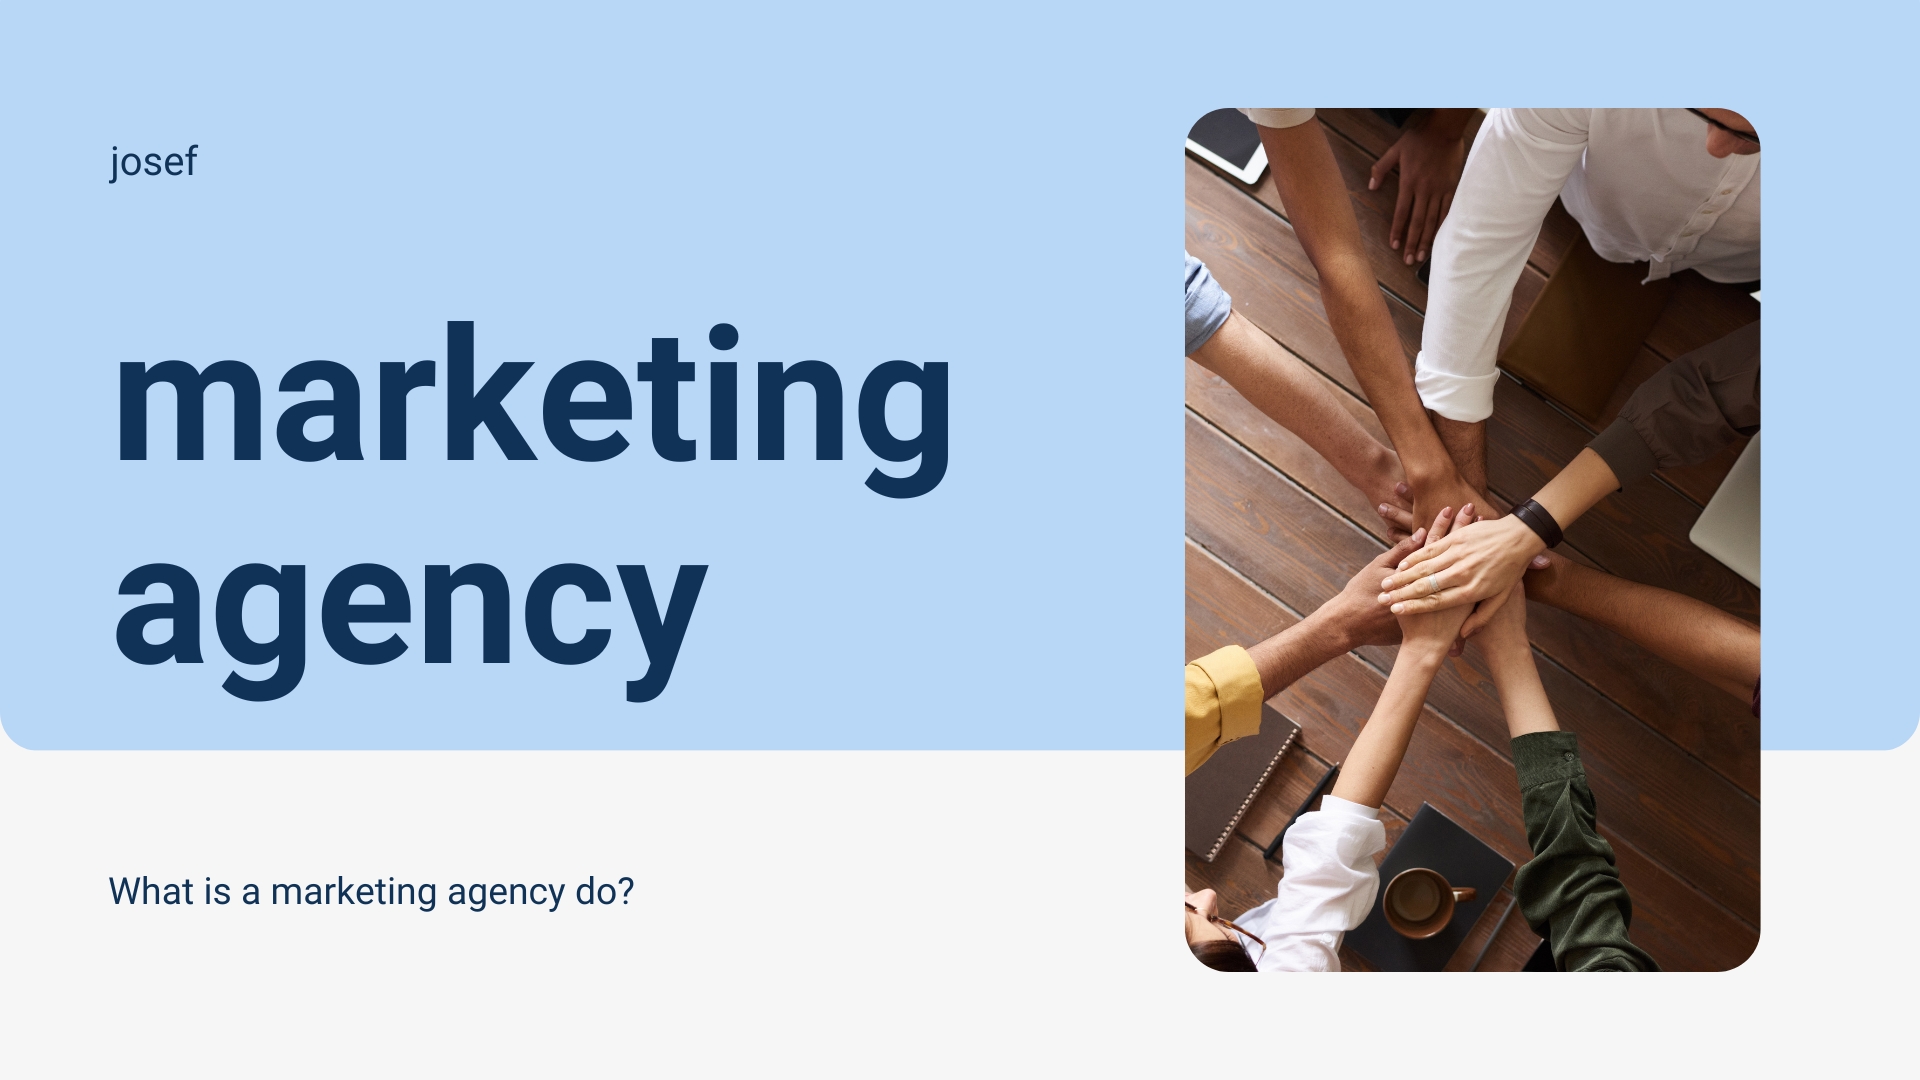 What is a marketing agency do